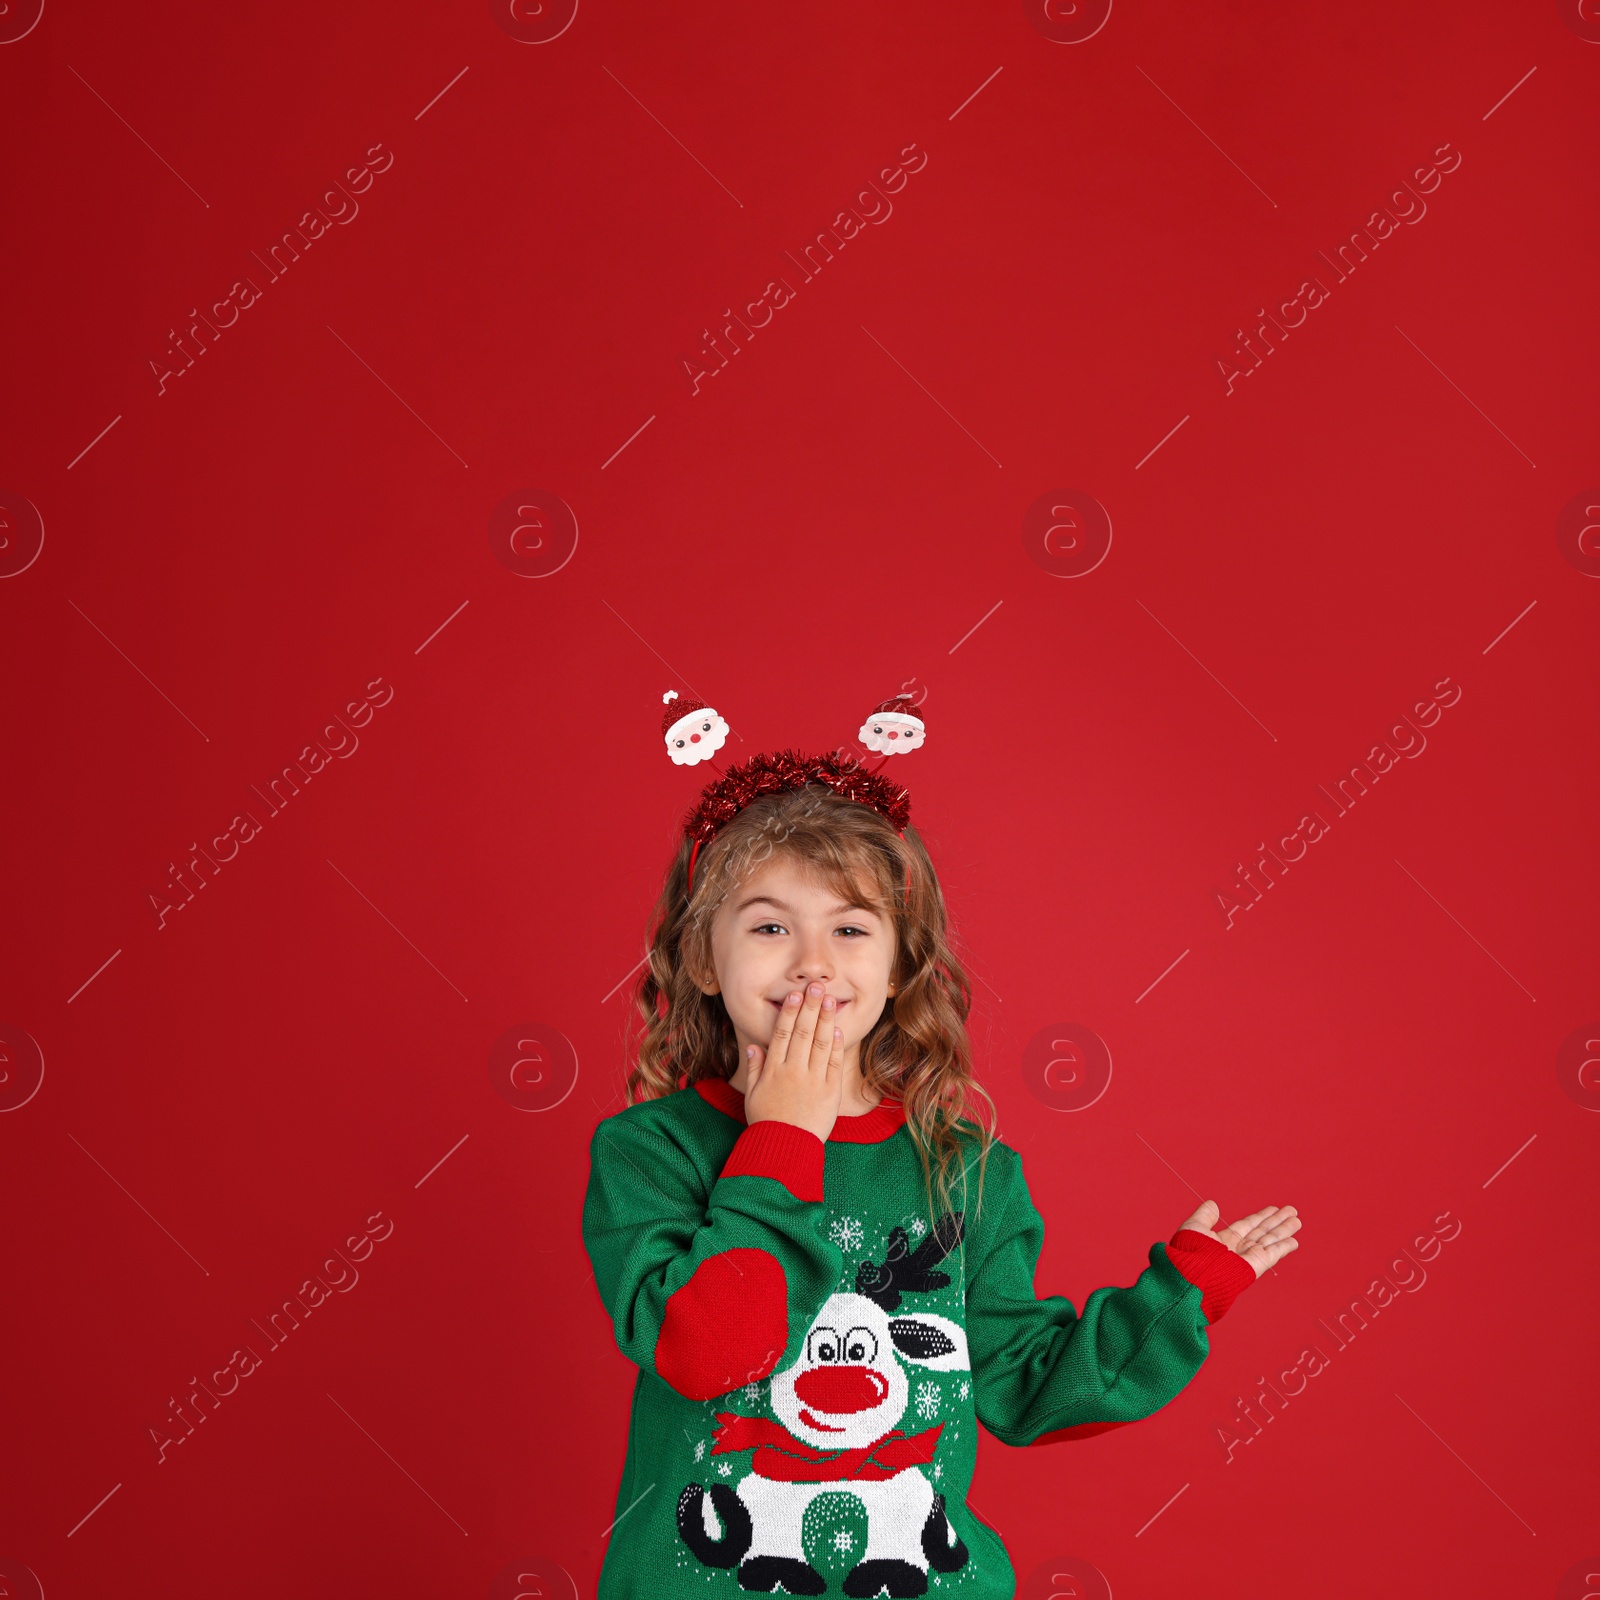 Photo of Cute little girl in green Christmas sweater covering her mouth against red background